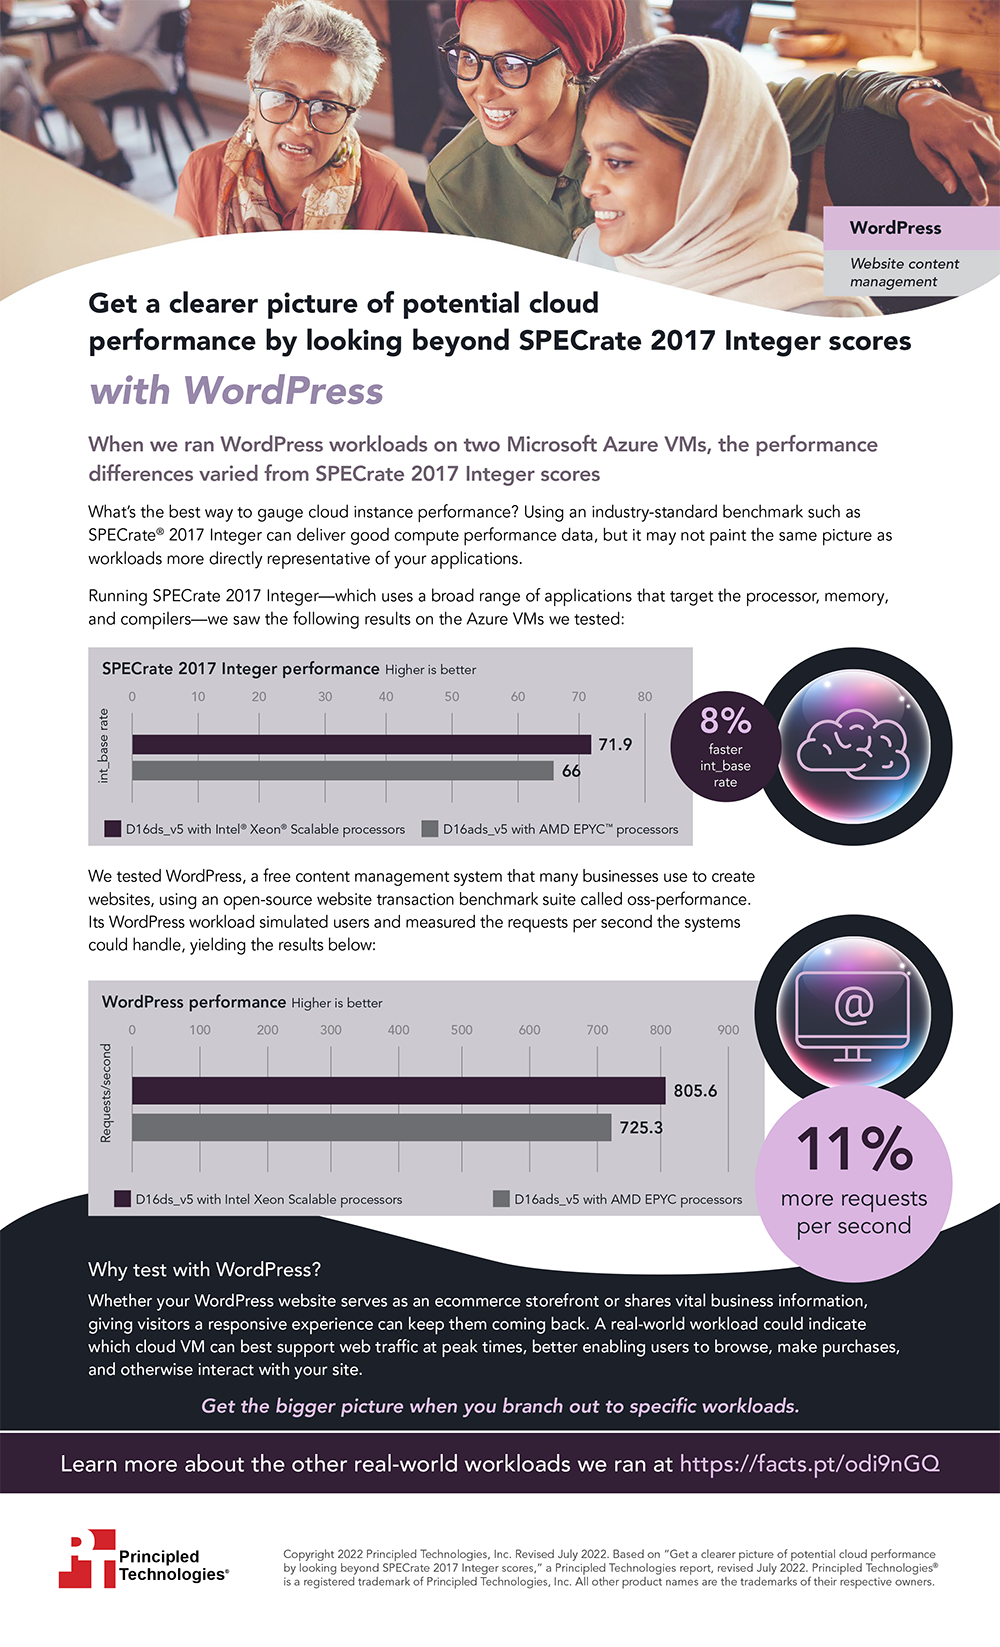 Get a clearer picture of potential cloud performance by looking beyond SPECrate 2017 Integer scores with WordPress – Infographic